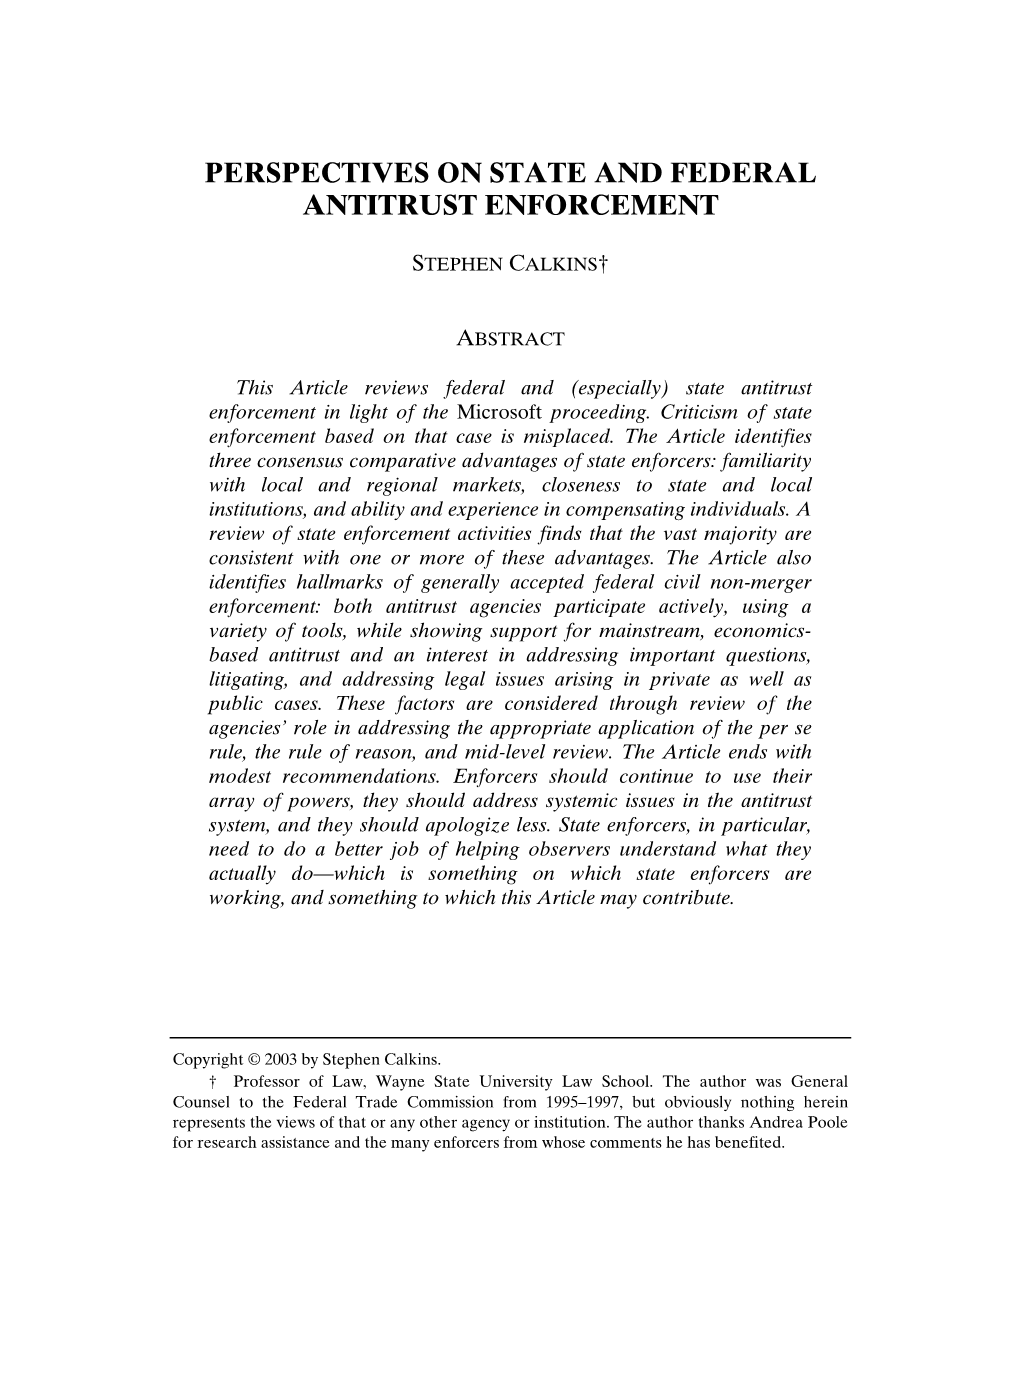 Perspectives on State and Federal Antitrust Enforcement